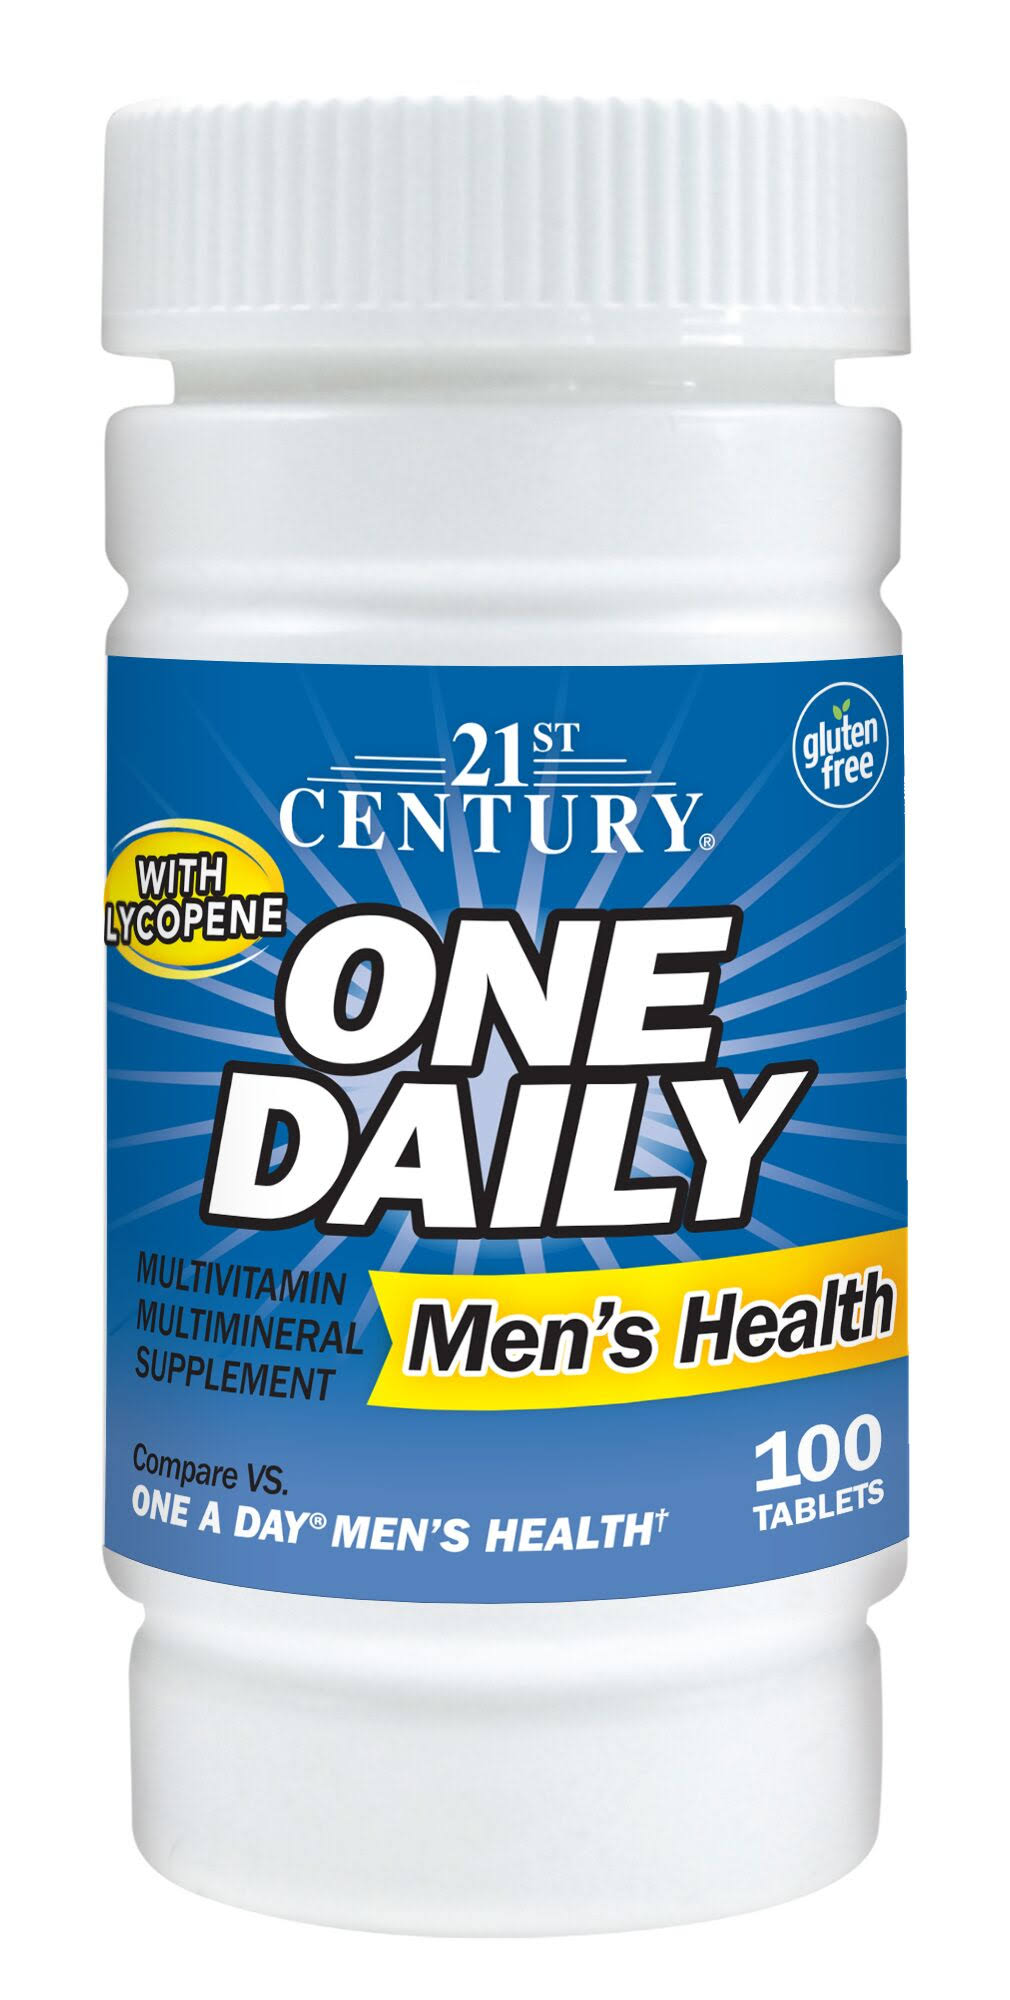 21st Century One Daily Men's Health Tablets - 100ct, Pack of 2